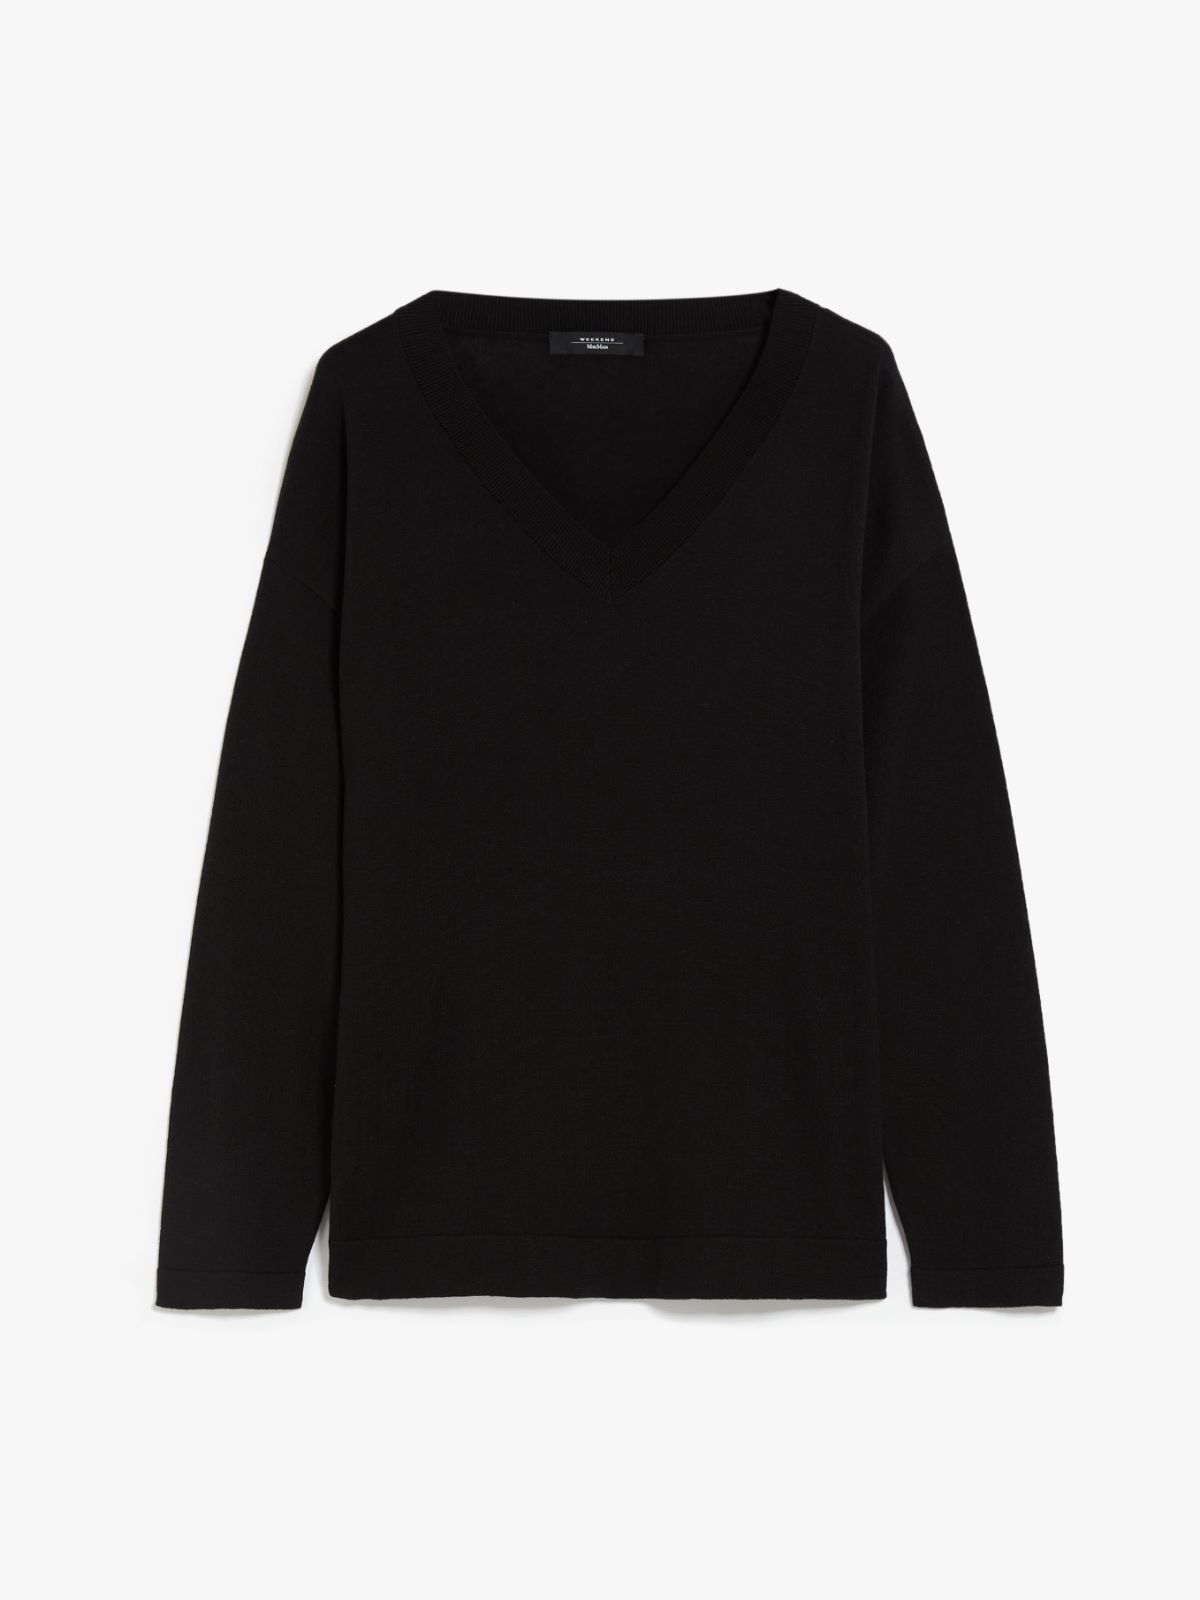 Oversized knit top in silk and cotton - BLACK - Weekend Max Mara - 6